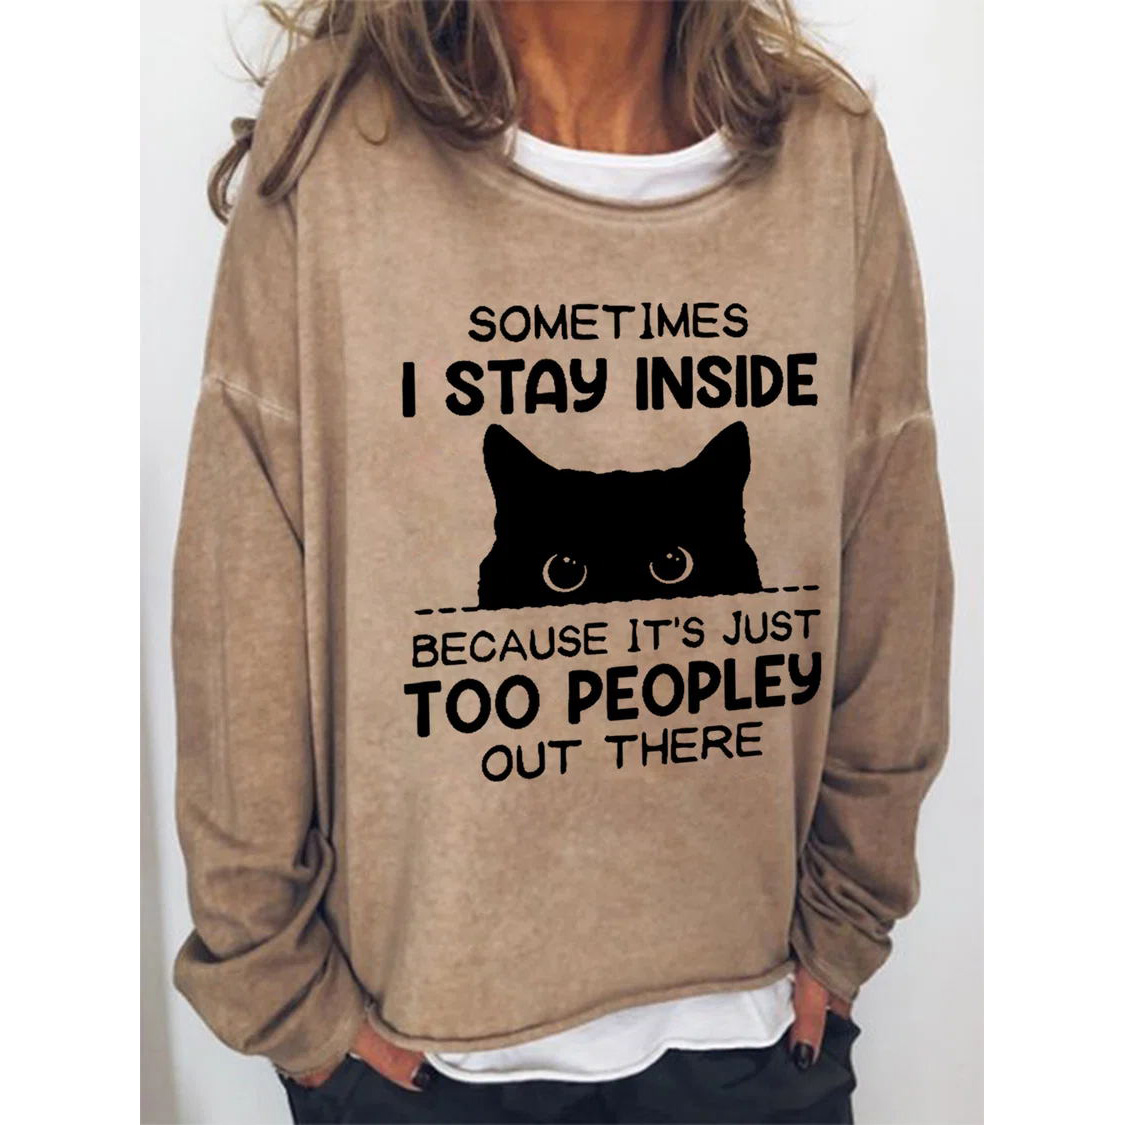 Funny Women Sometimes I Chic Stay Inside Because It's Just Too Peopley Out There Sweatshirts